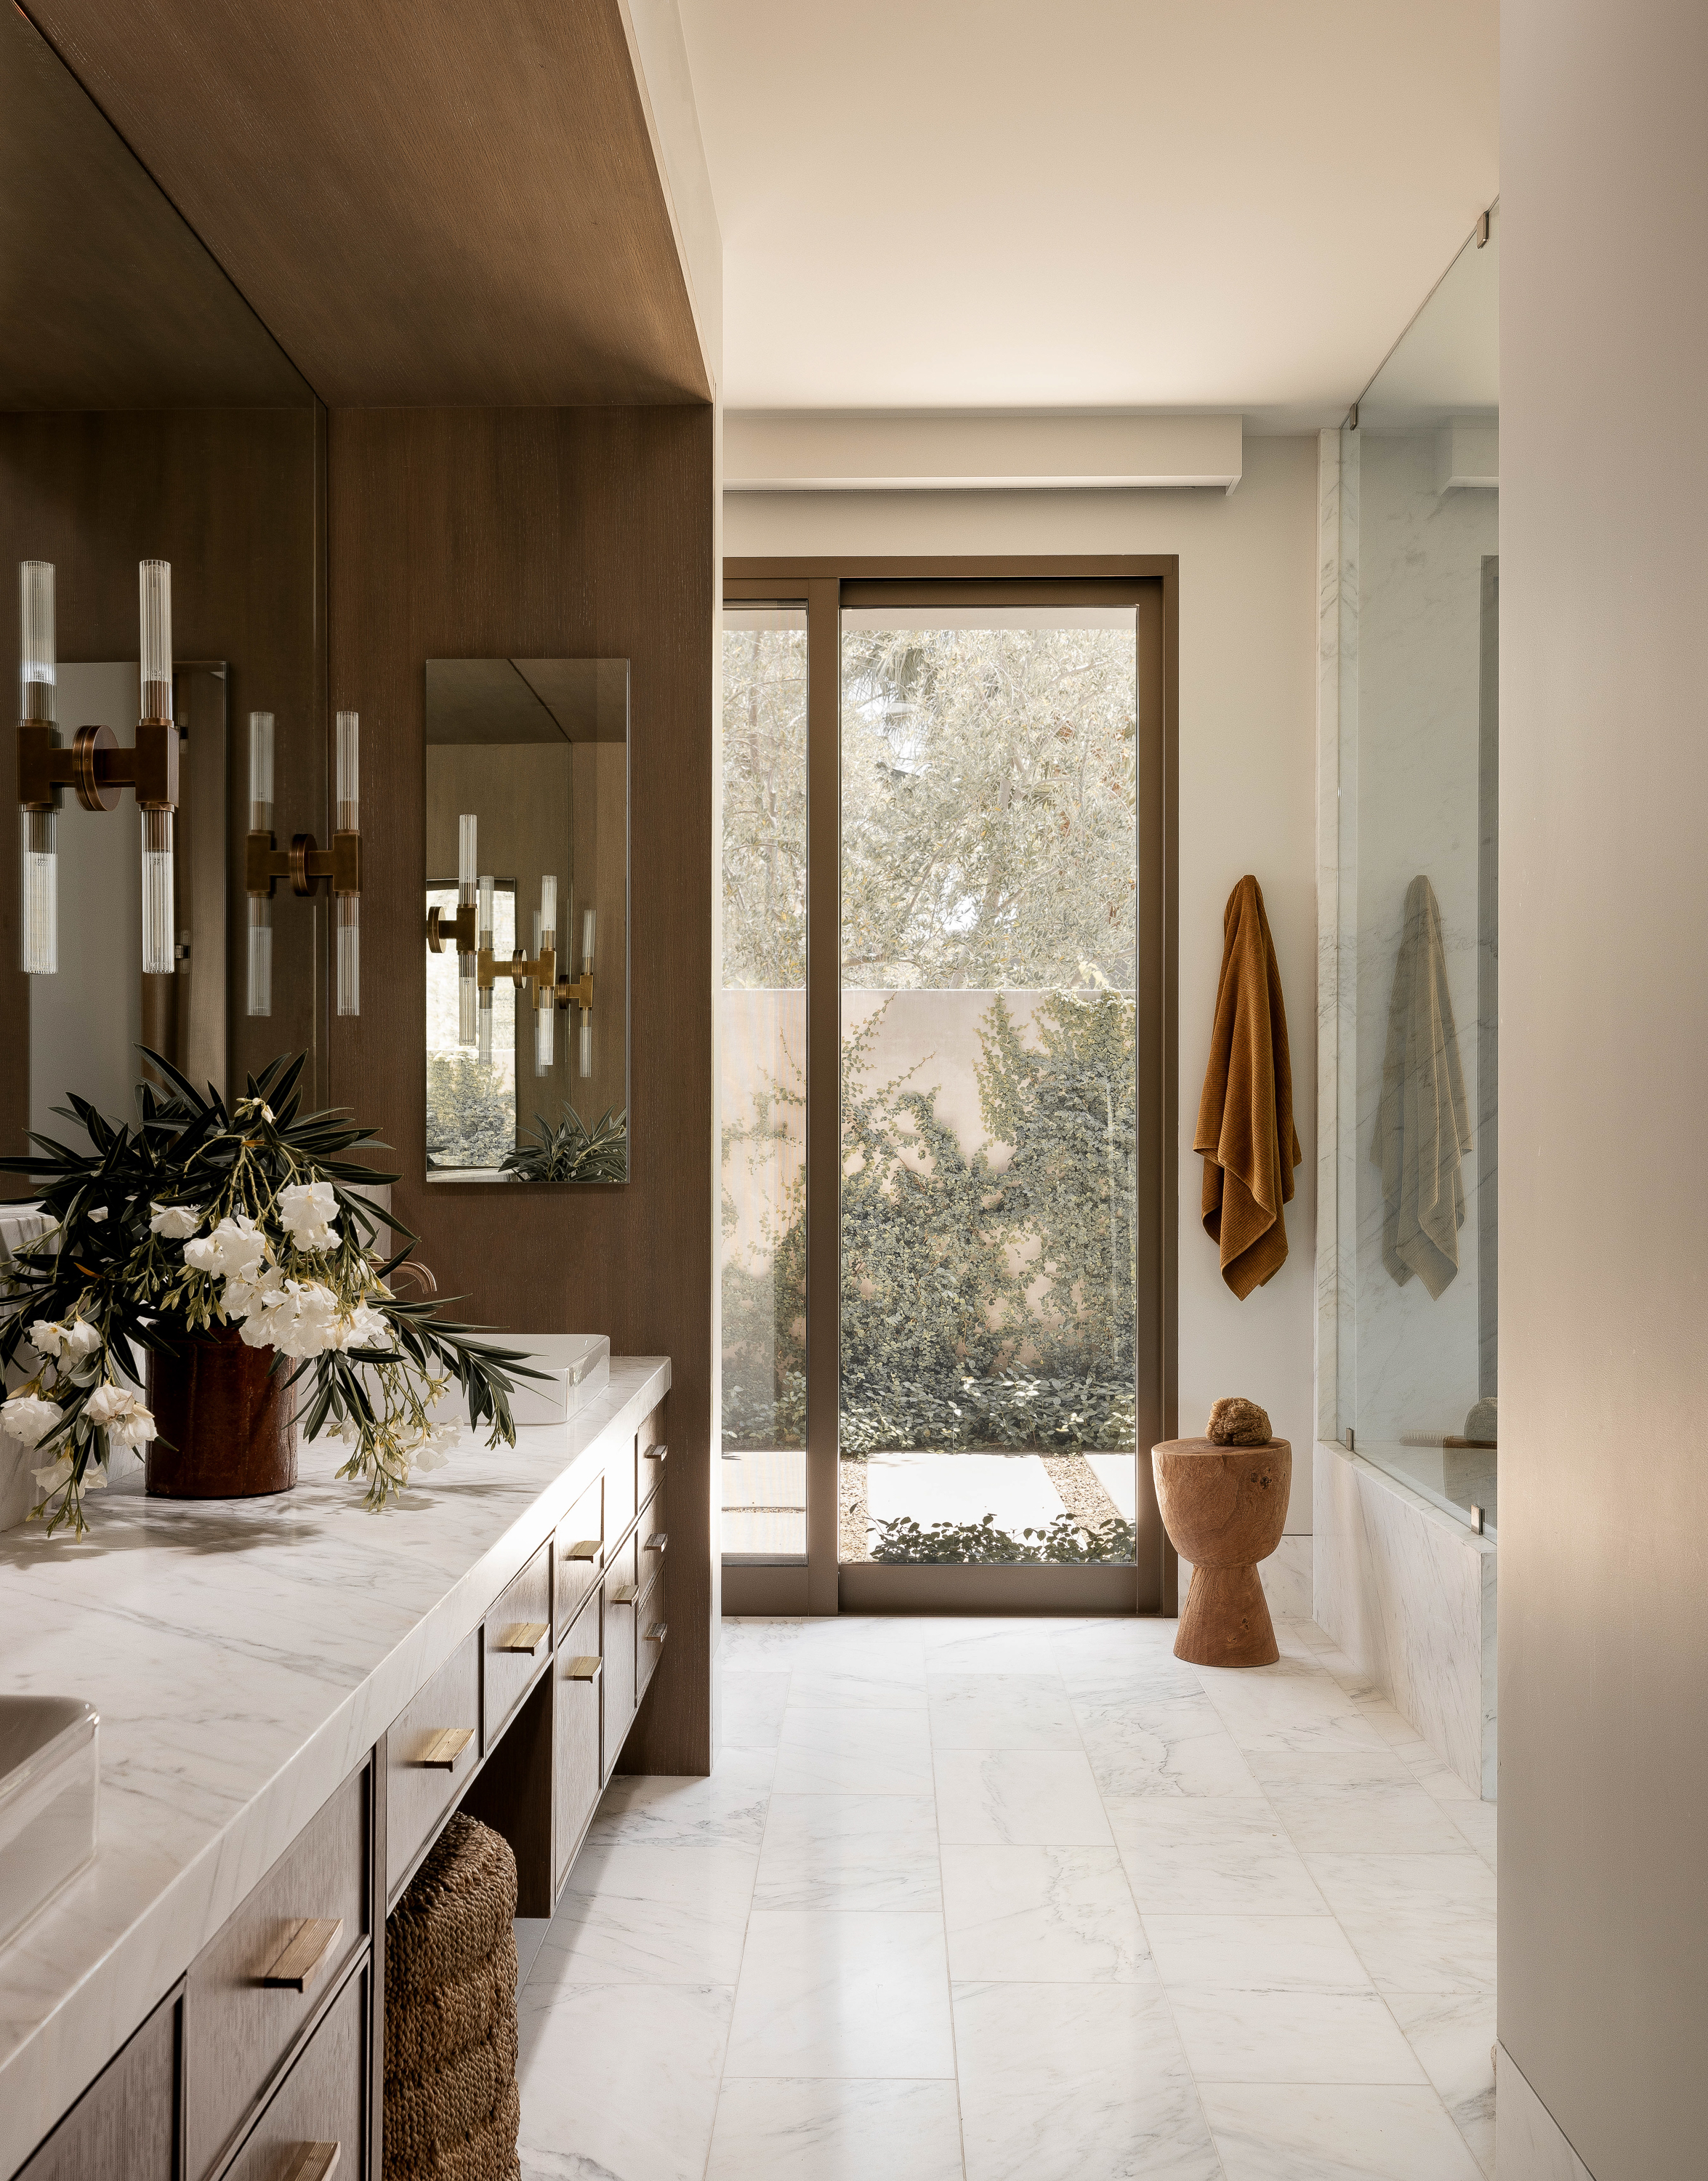 Primary bathroom at Palm Springs Retreat: A luxurious oasis with a walk-out walled shower backdrop, offering a warm and earthy contrast to the stone environment